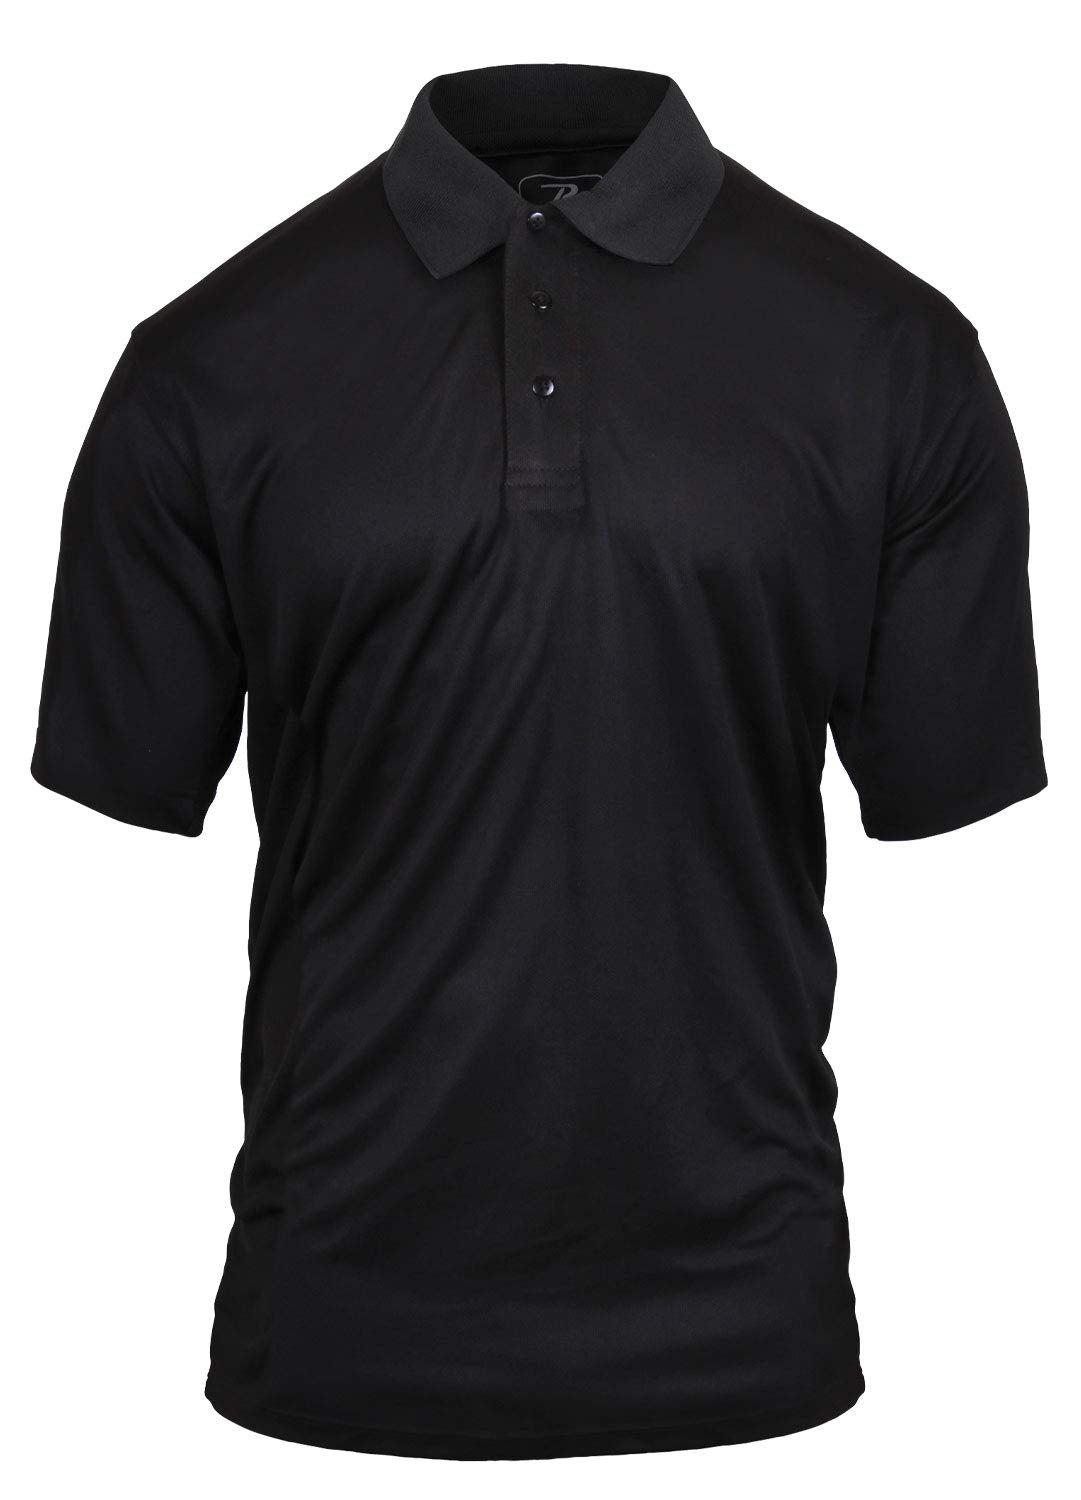 Rothco Moisture Wicking Security Polo Shirt With Back Print Only